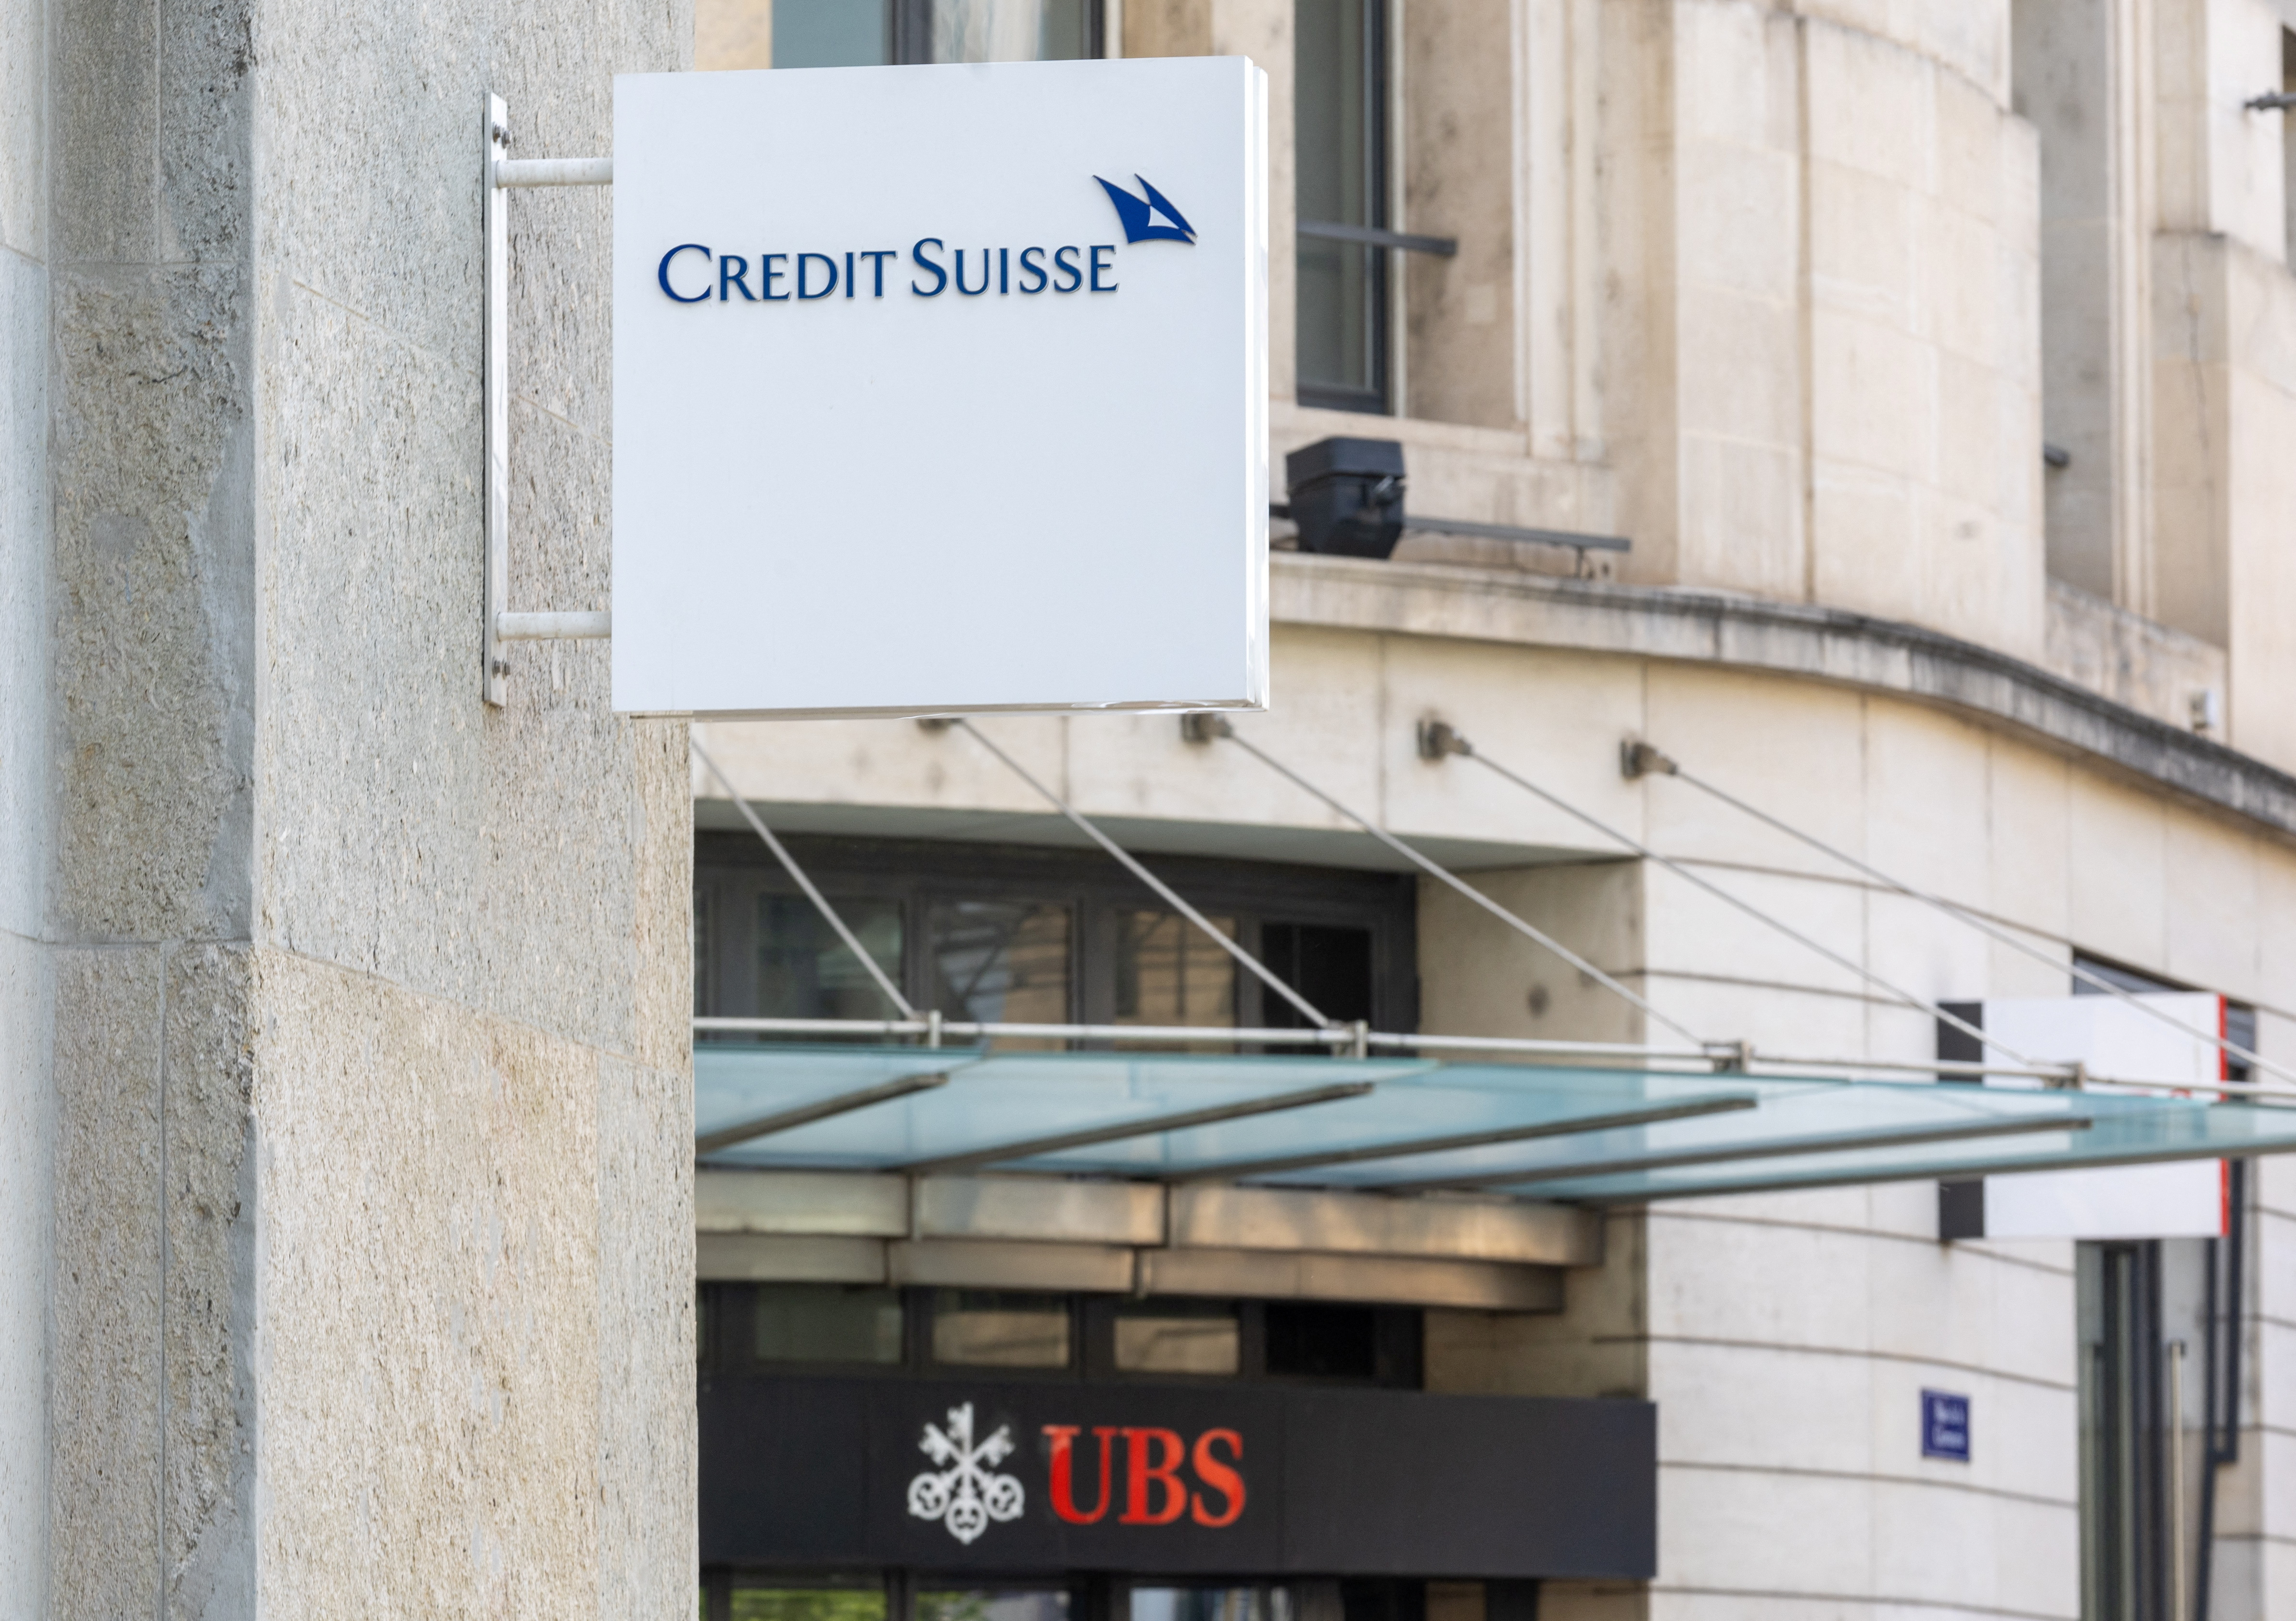 The logos of Swiss bank Credit Suisse and UBS are seen in Geneva